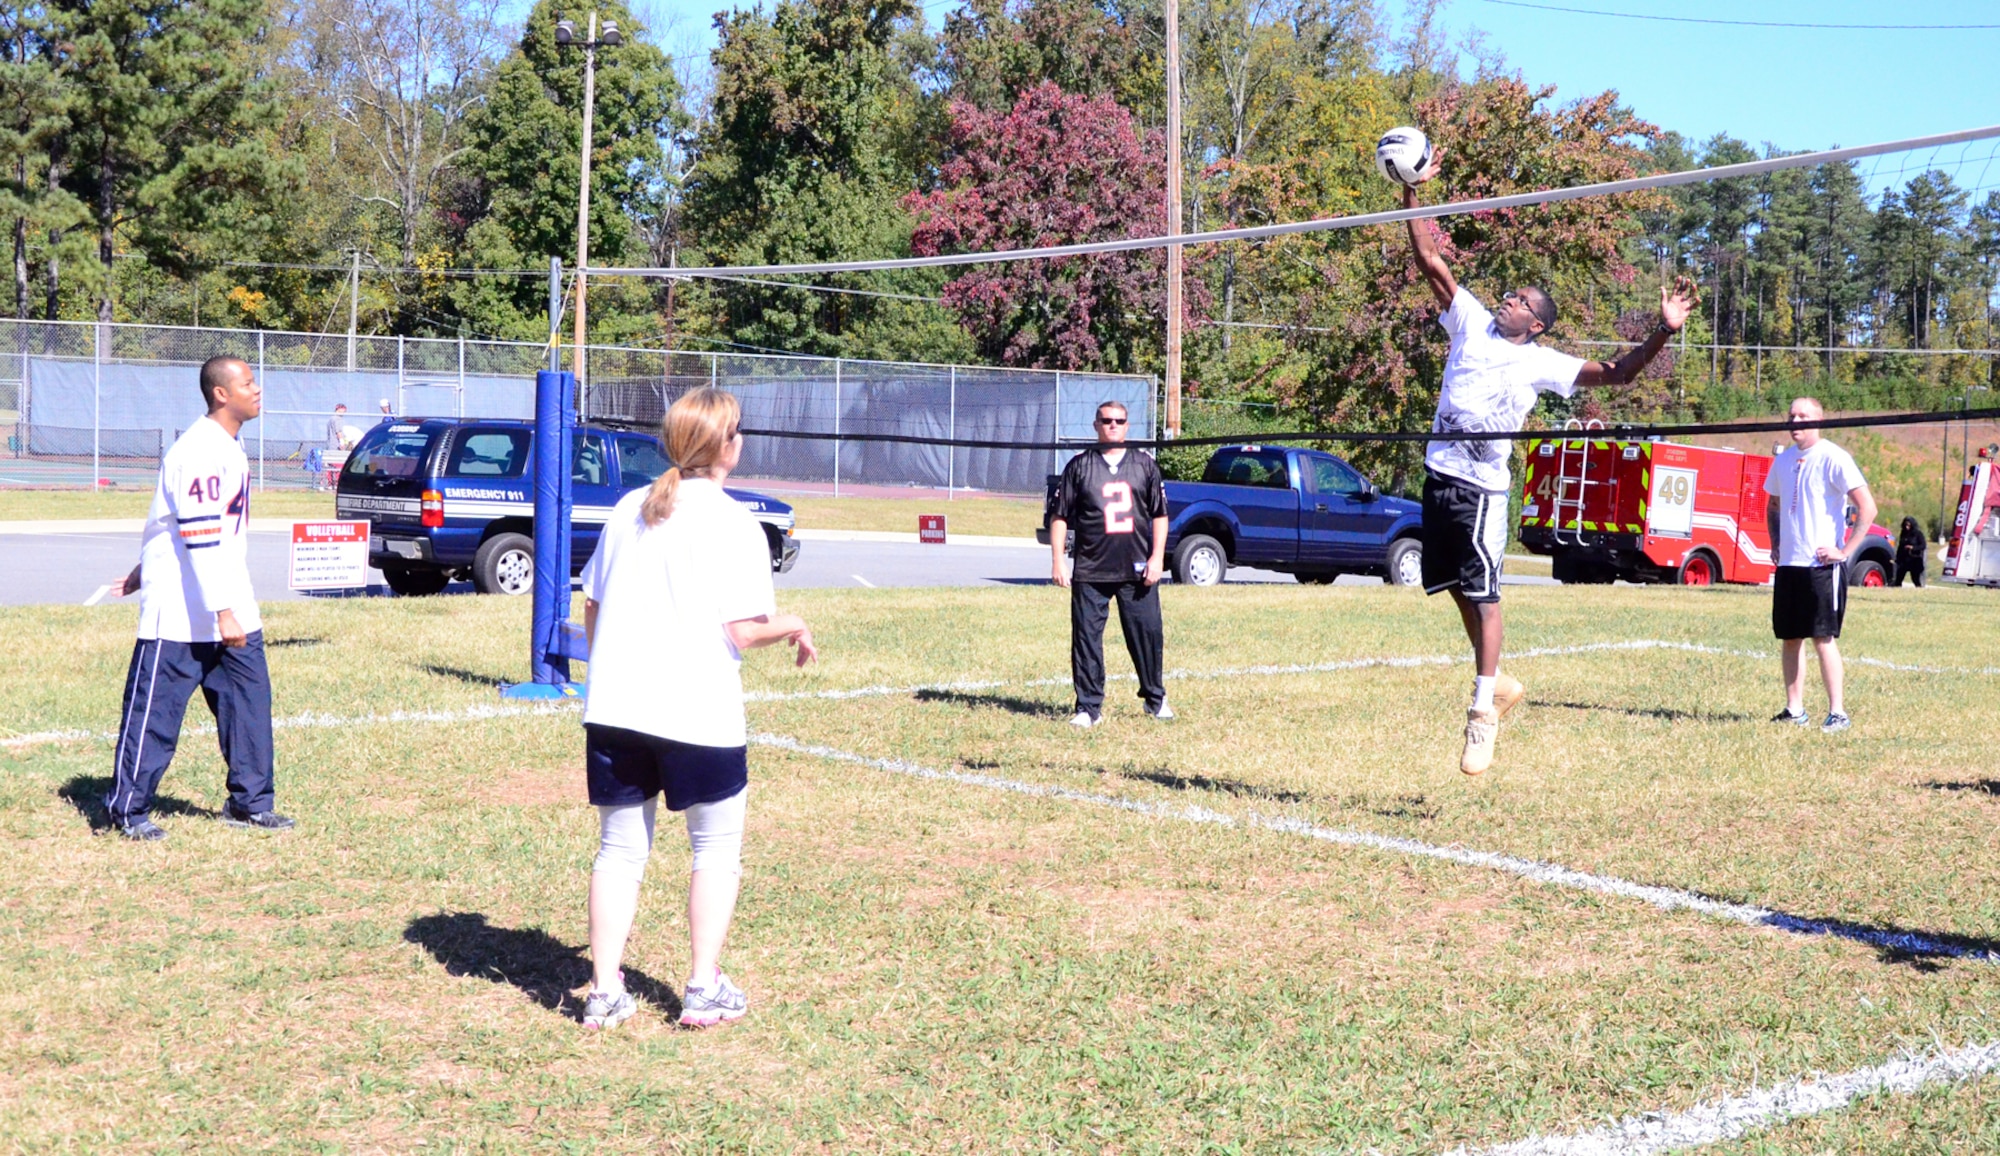 Teams compete in volleyball as one of 15 events at the Annual 94th Airlift Wing Team Day at Dobbins Air Reserve Base, Ga., Oct. 16. Team day is designed to promote team work and competitive spirit between units. (U.S. Air Force photo/ Senior Airman Elizabeth Van Patten)